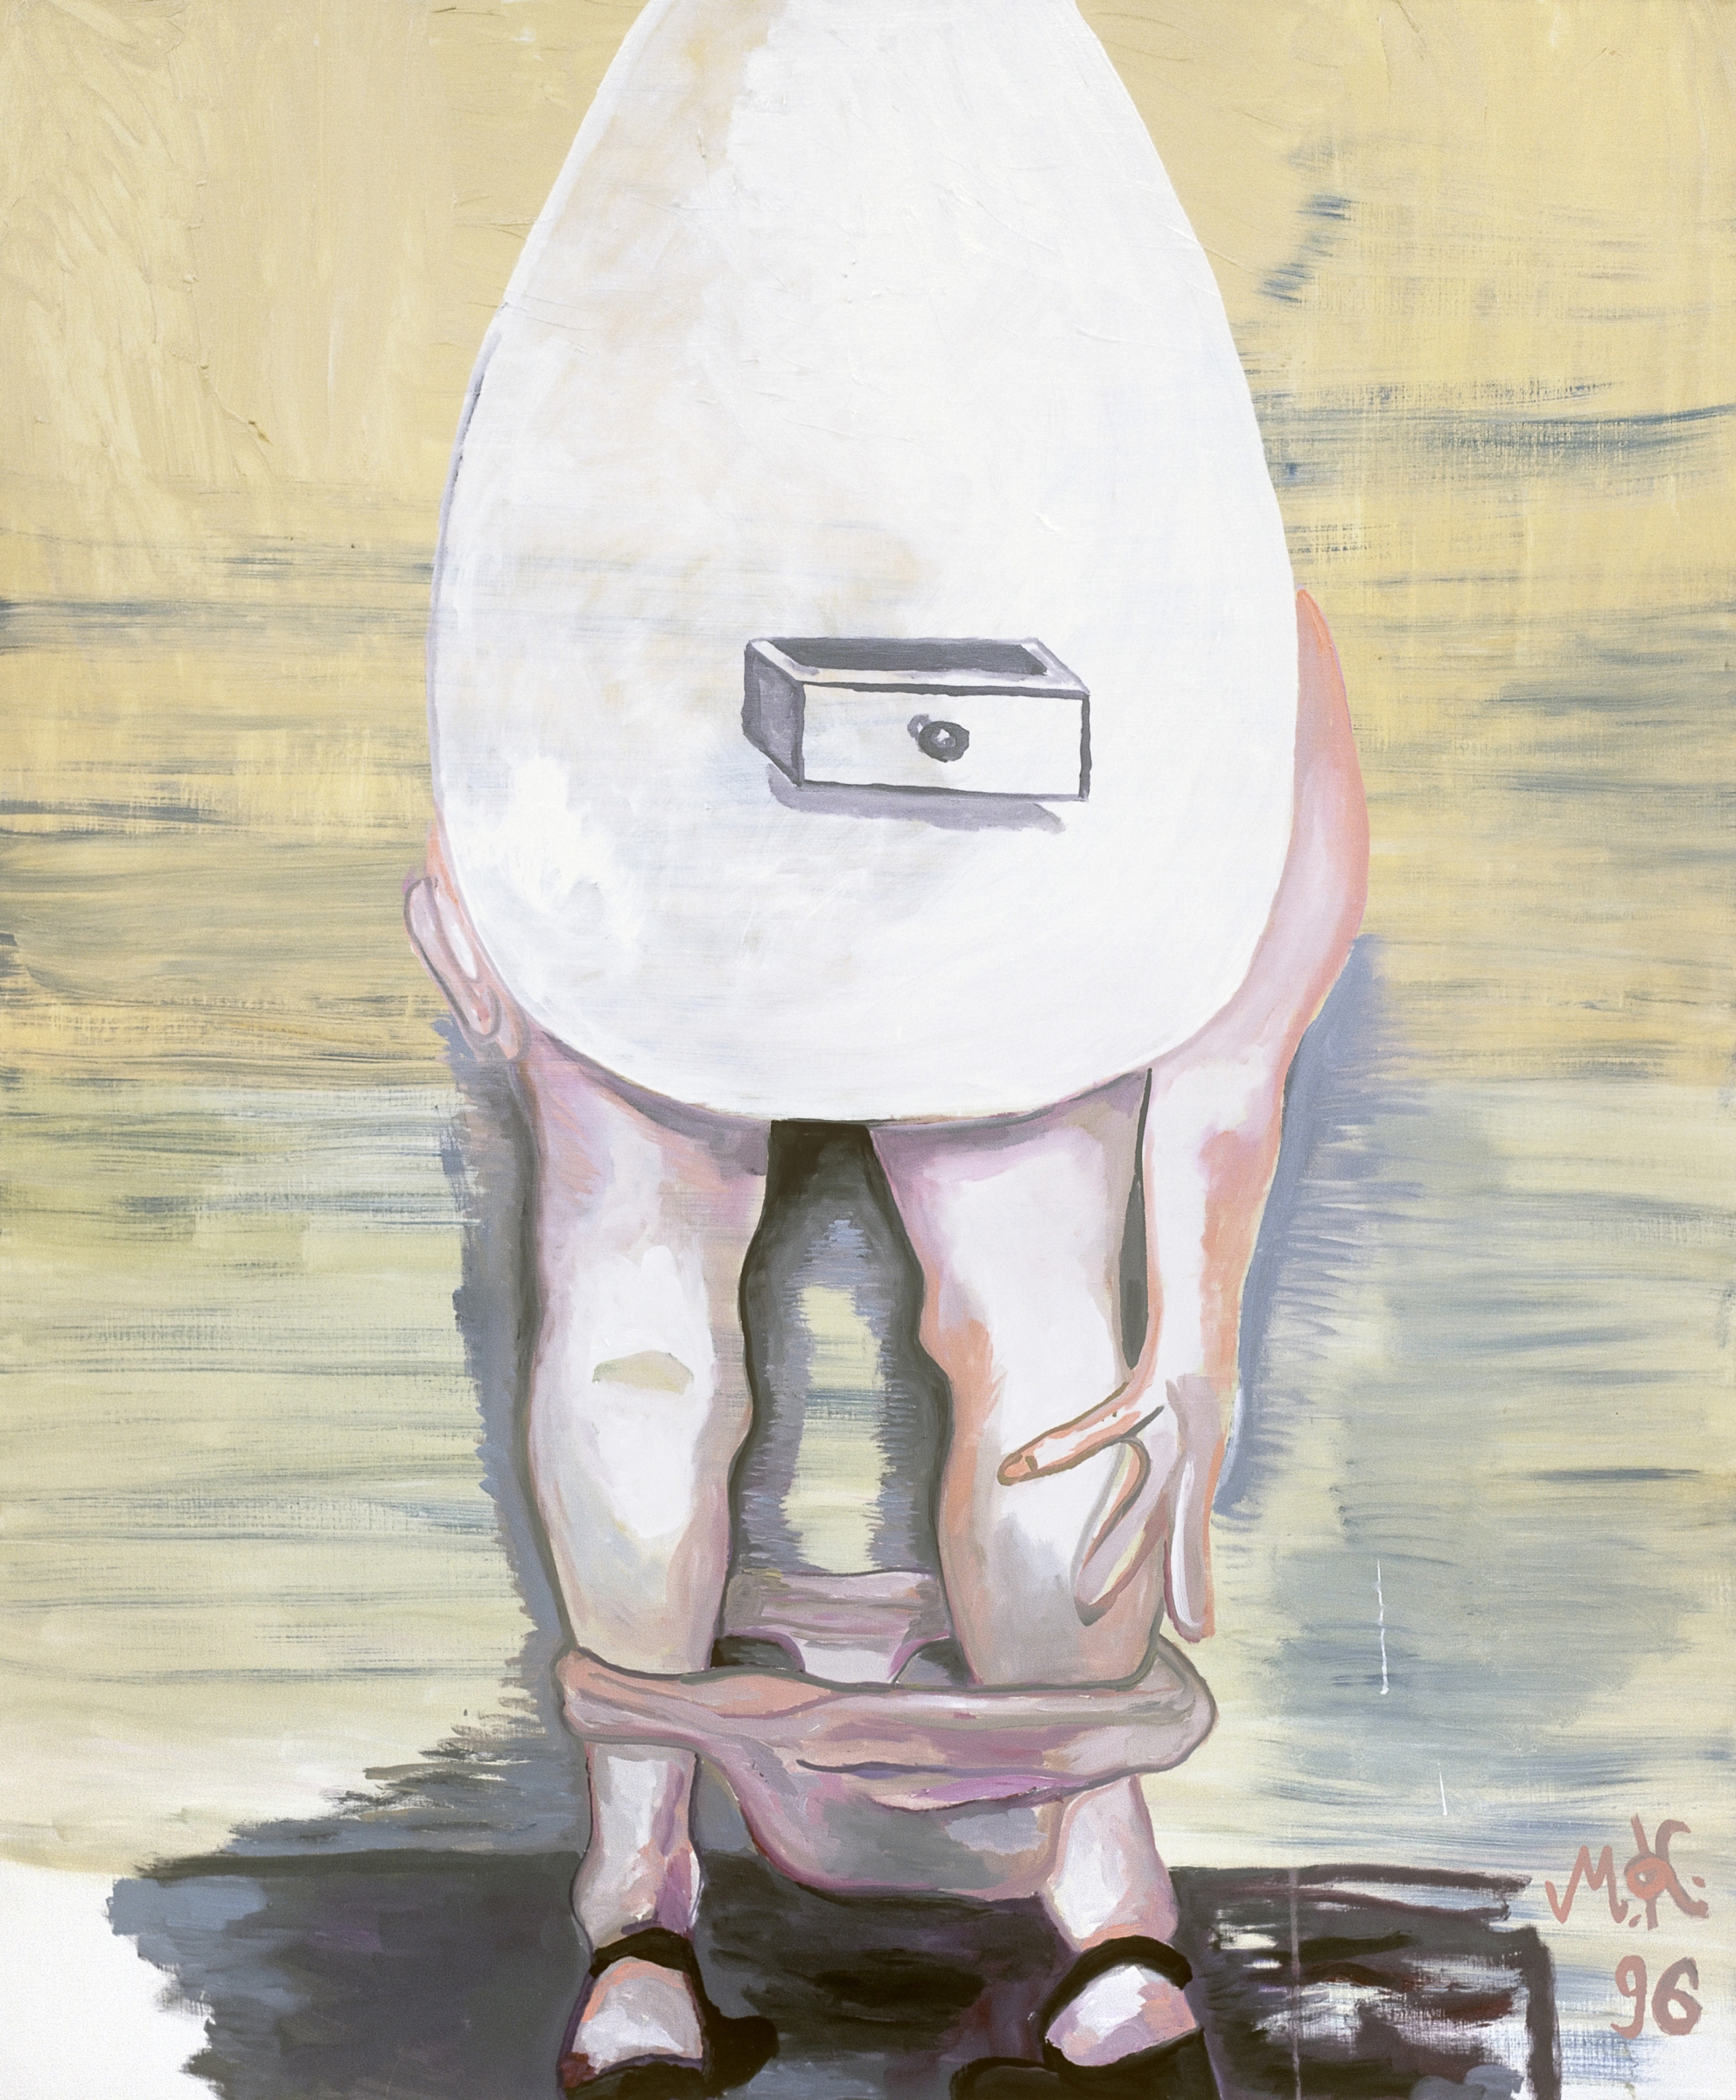 Martin Kippenberger
Egg Lady Who Can&#39;t Be Pigeonholed, 1996
oil on canvas&nbsp;
71 x 59 1/8 inches
(180 x 150 cm)
&copy; Estate of Martin Kippenberger, Galerie Gisela Capitain, Cologne